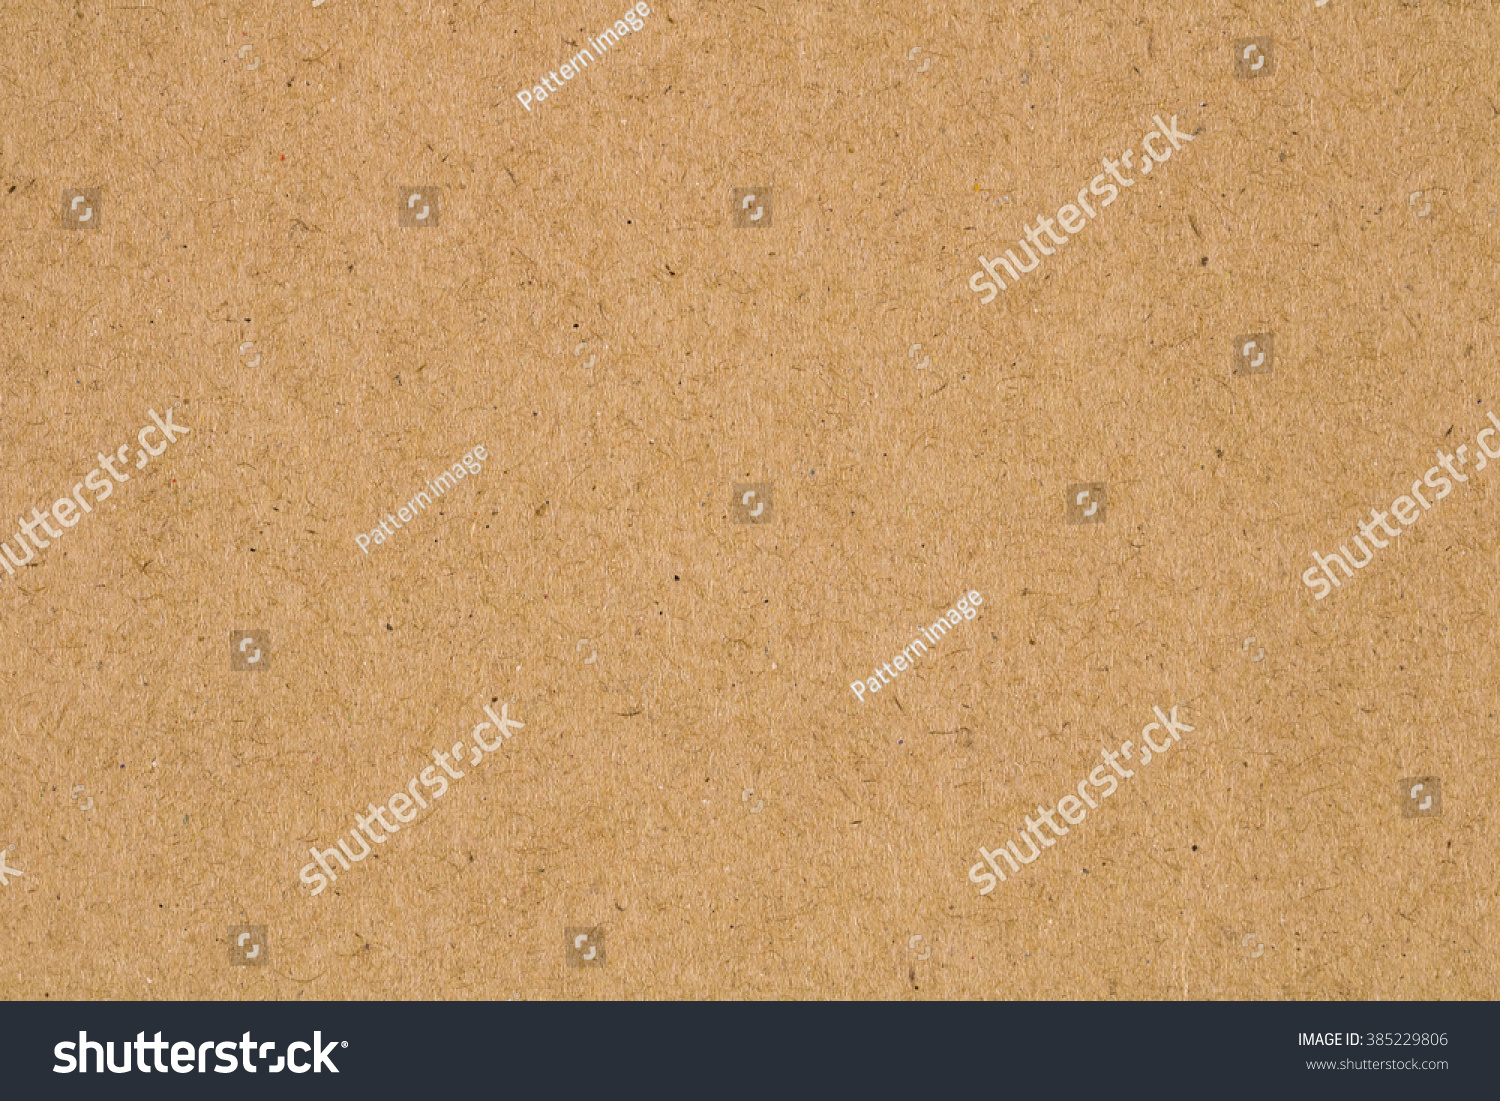 Brown paper close-up #385229806